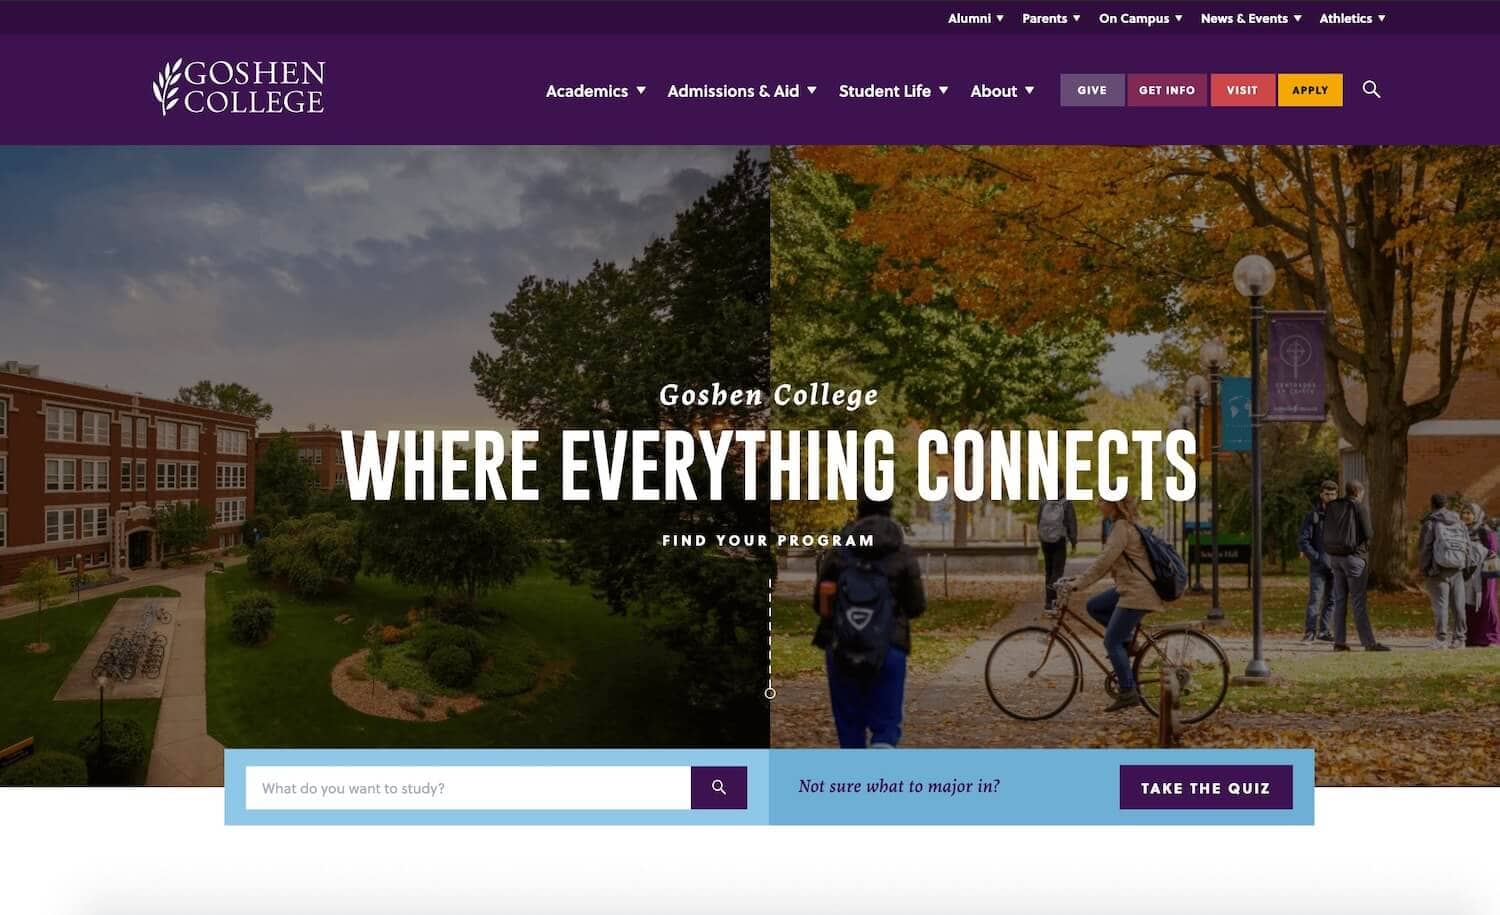 A CTA used on Goshen College's website